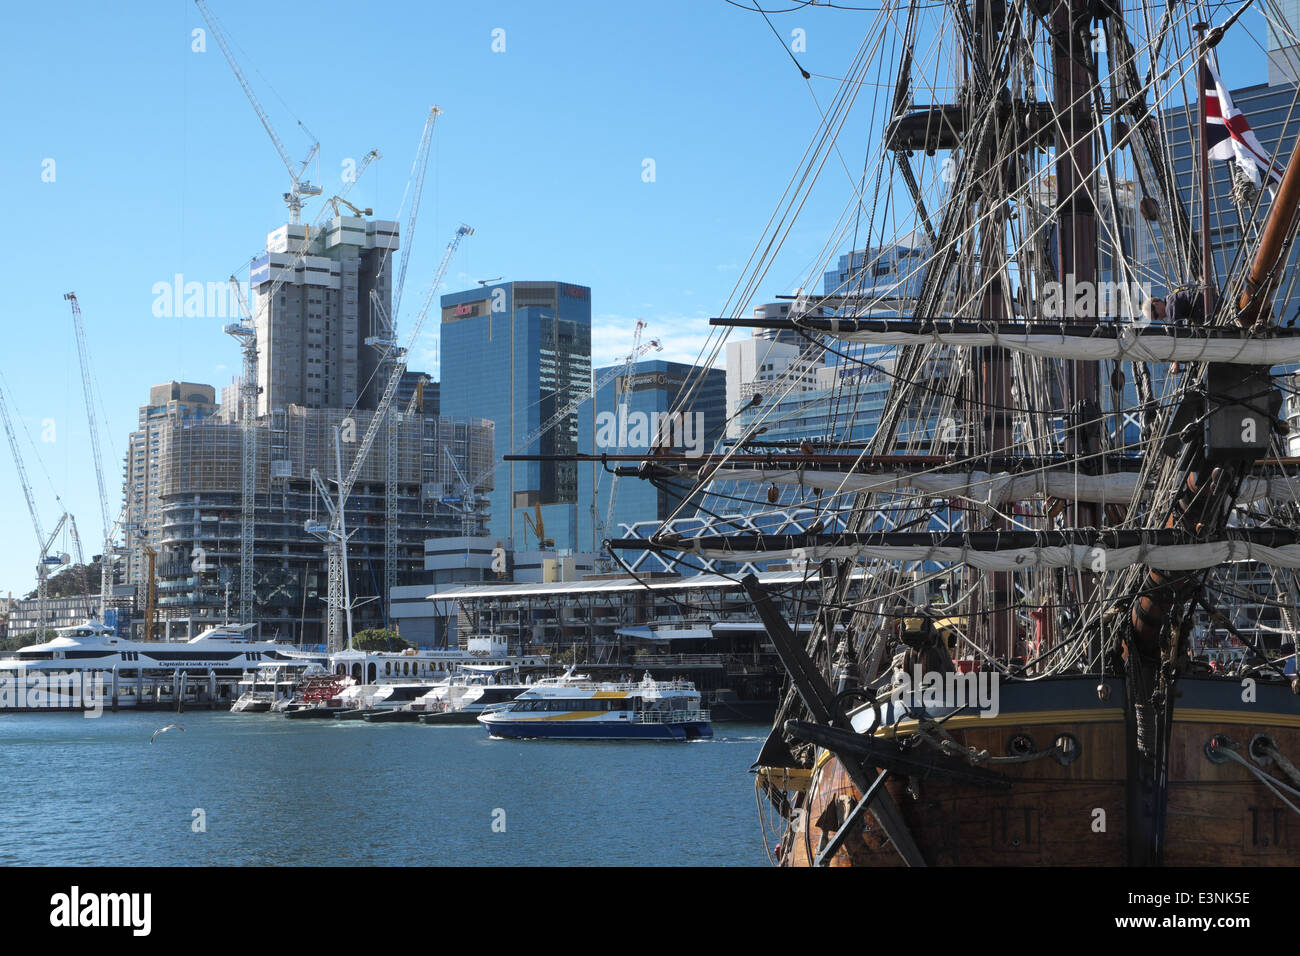 replica of captain cook ship, Endeavour  maritime museum at cockle bay, Darling Harbour,Sydney,New South Wales,Australia Stock Photo